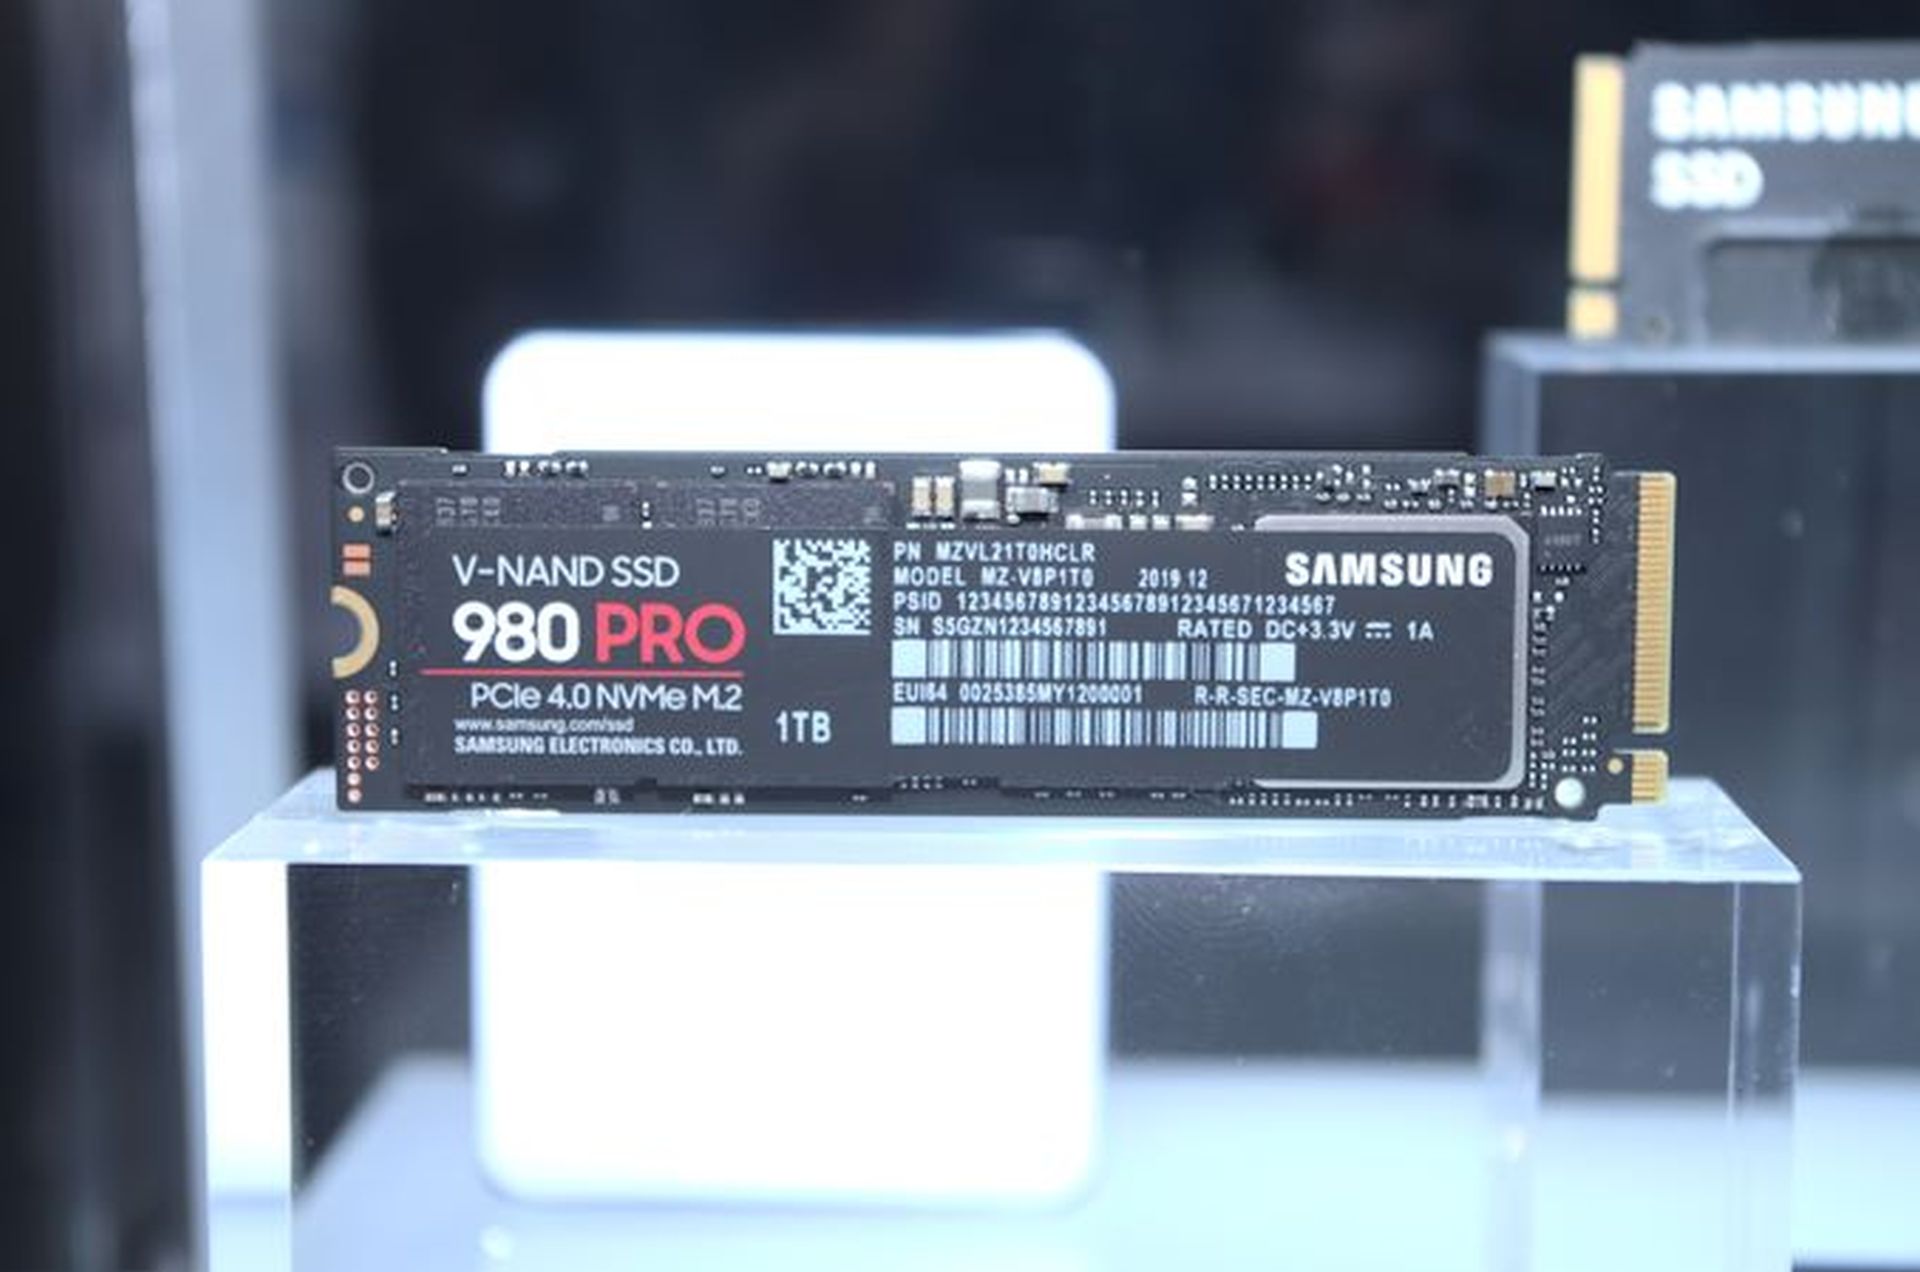 Samsung finally launches 980 Pro, its first PCIe 4.0 NVMe consumer SSD -  SamMobile